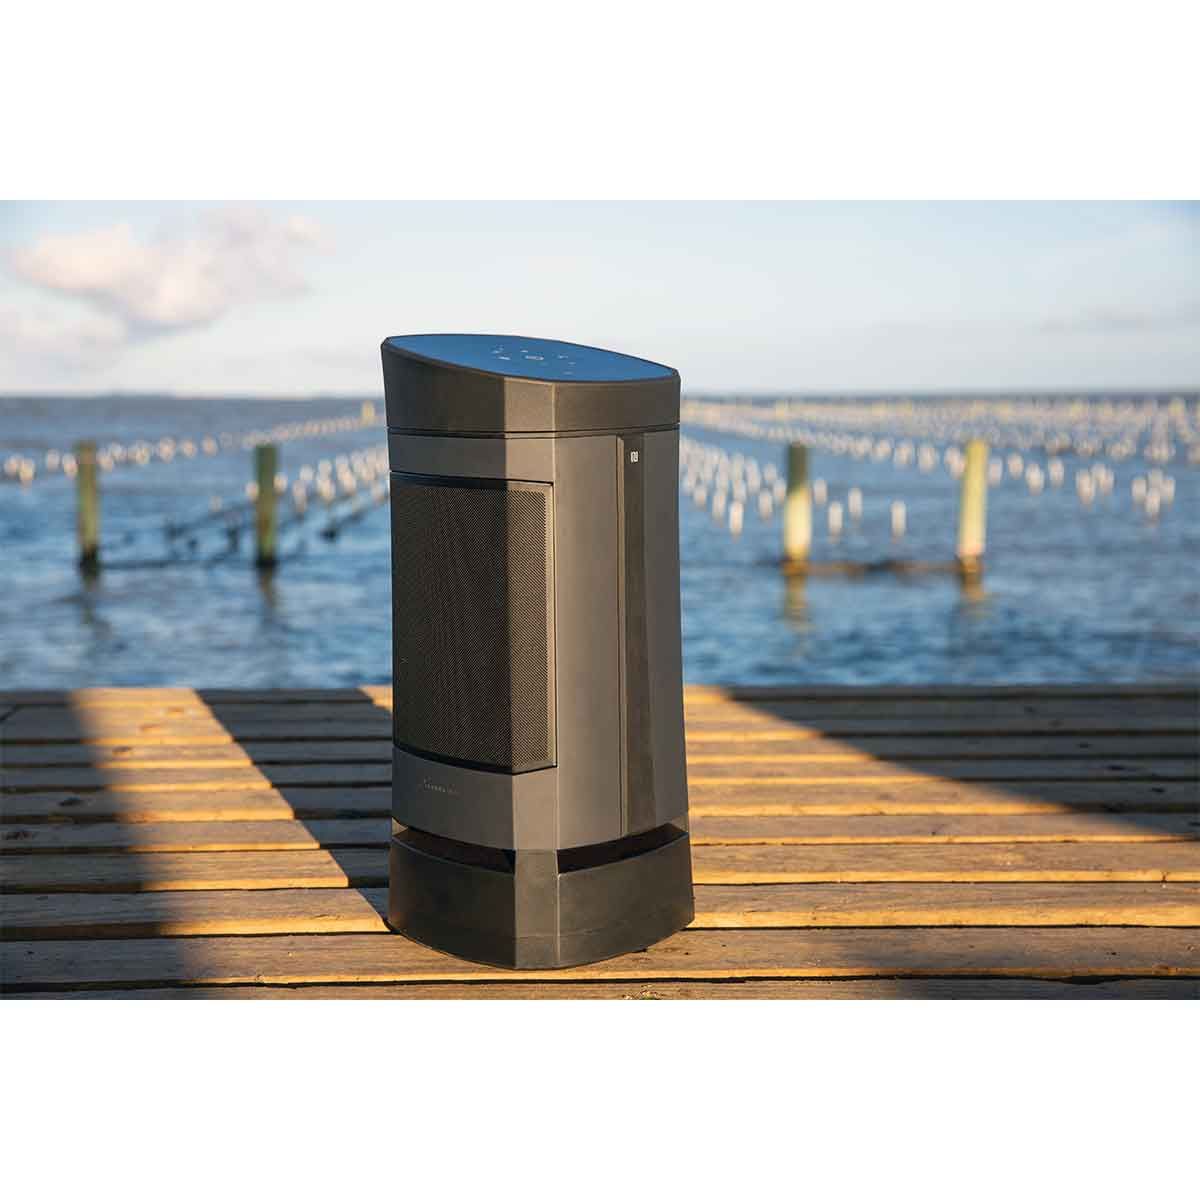 Close-up shot of the Soundcast VG5 Portable Waterproof Bluetooth Speaker's front view on a boat dock.